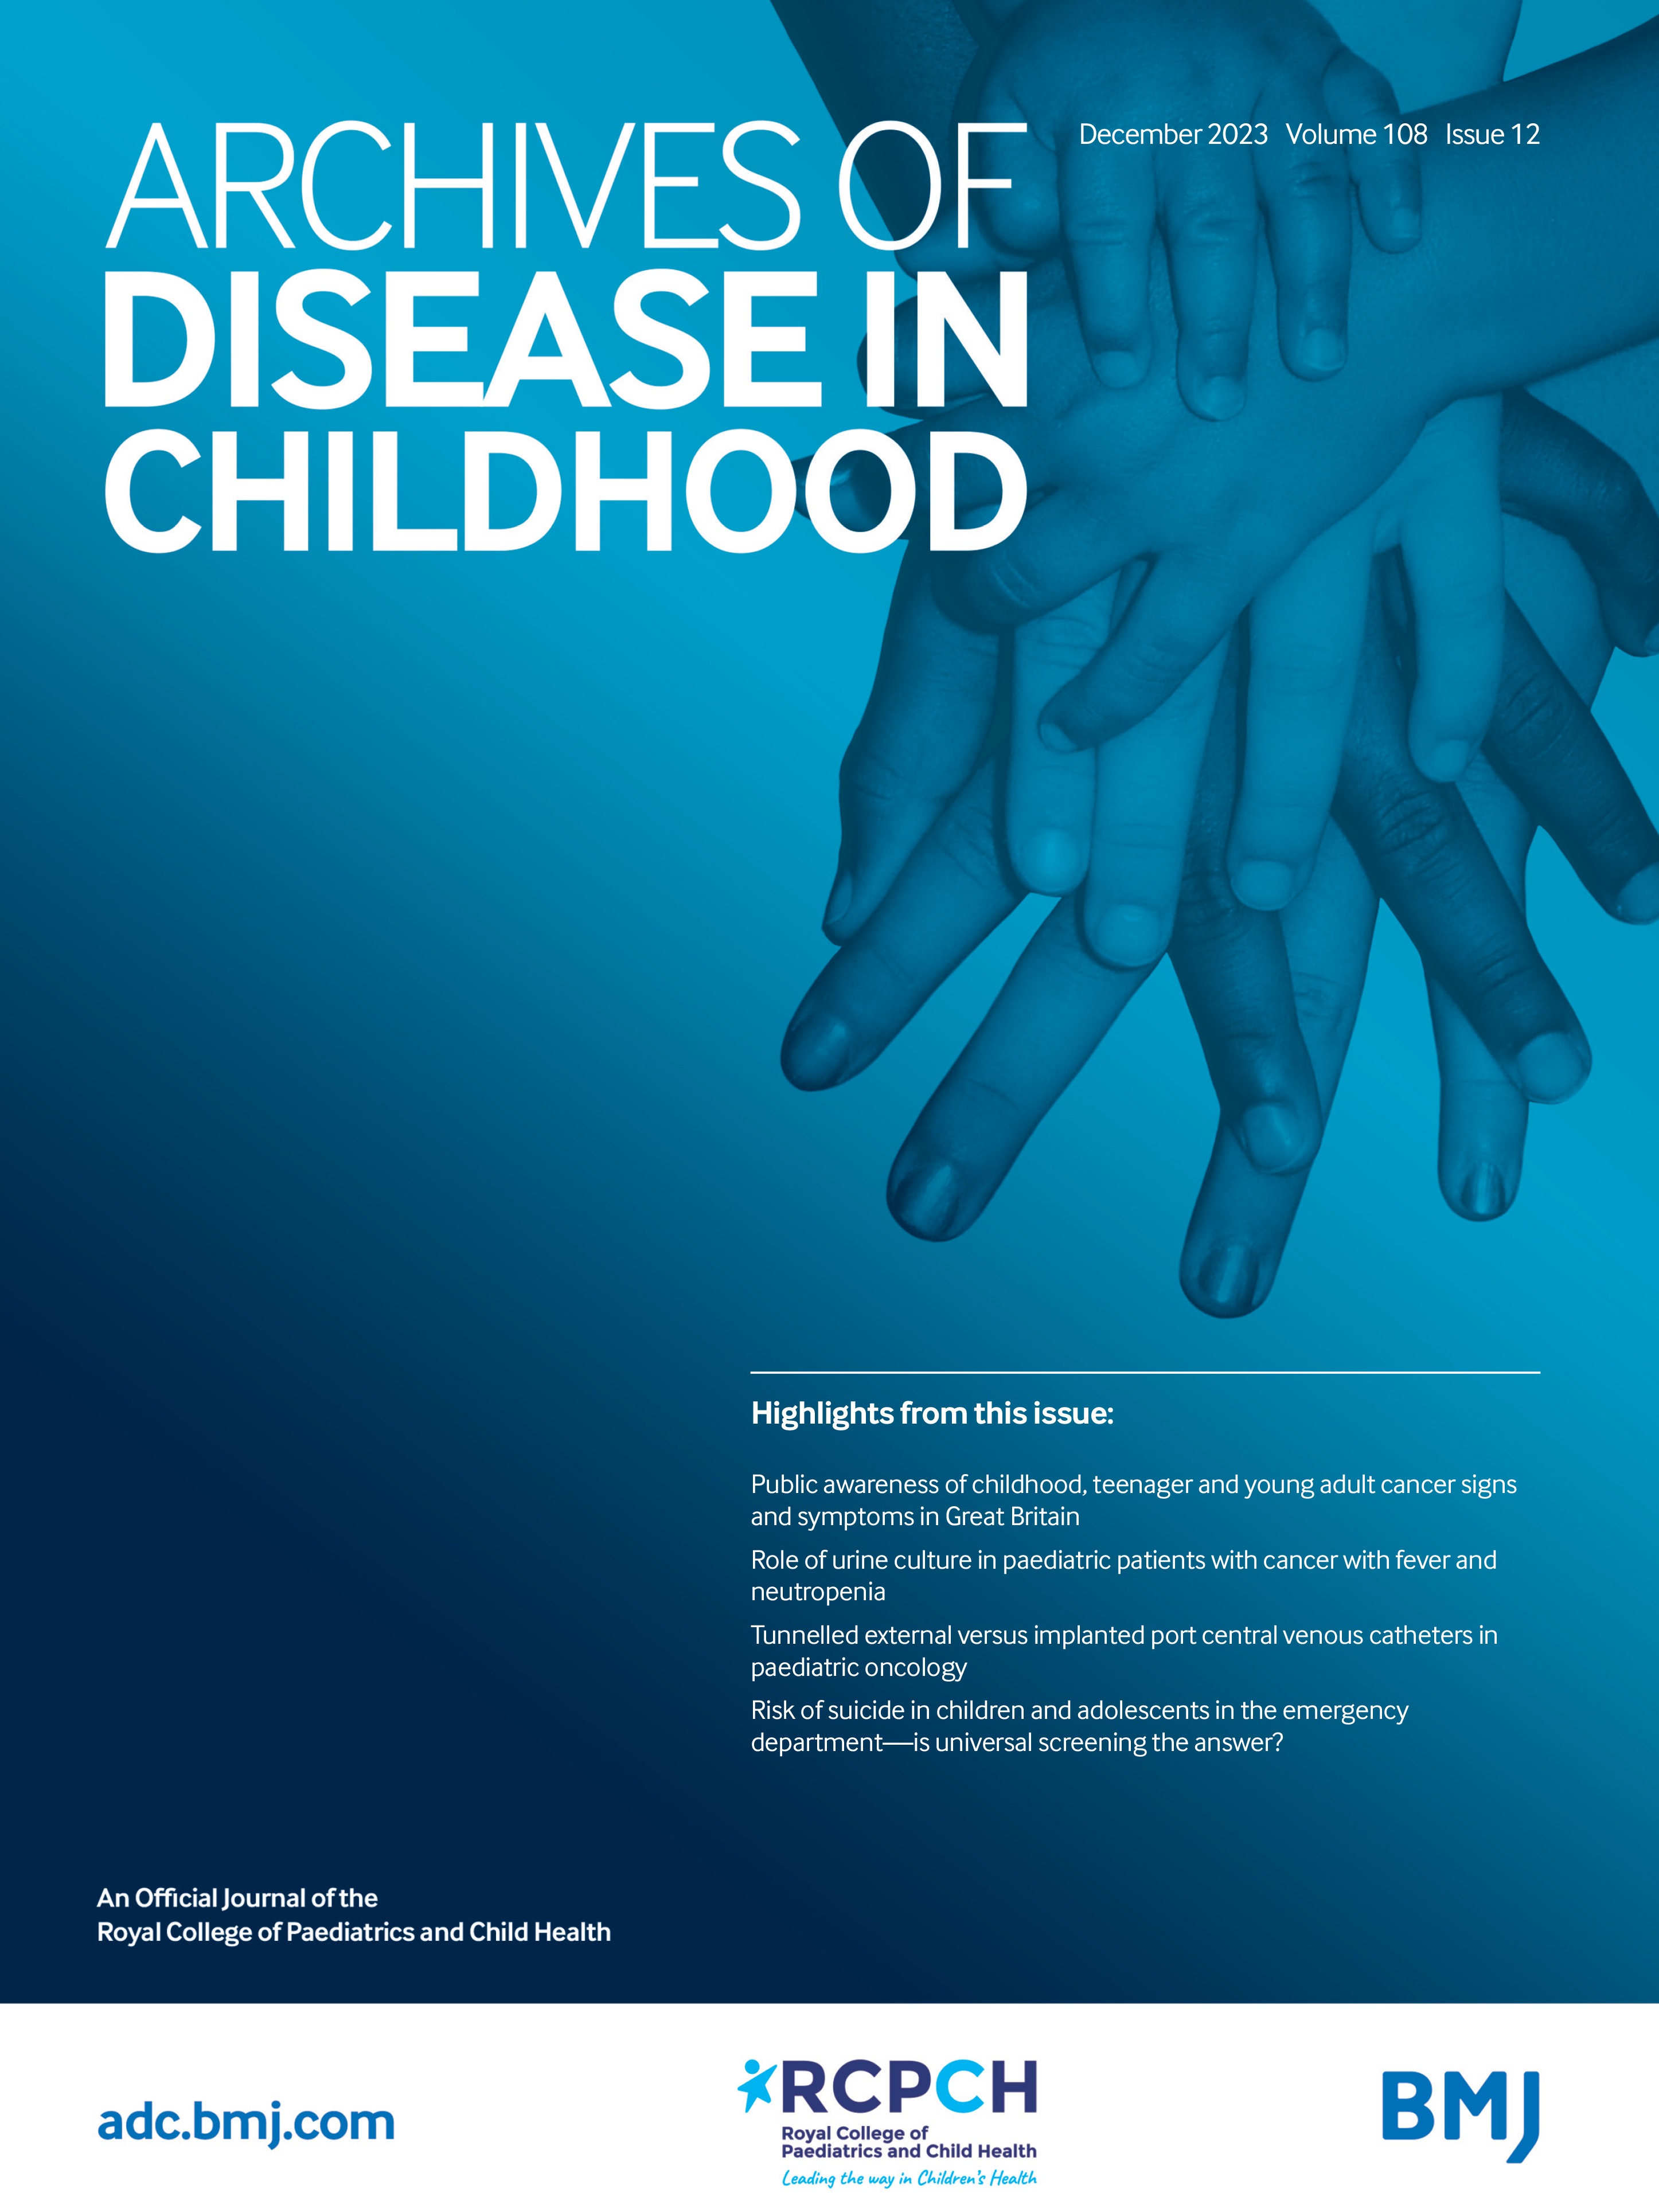 Public awareness of childhood, teenager and young adult cancer signs and symptoms in Great Britain: a cross-sectional survey